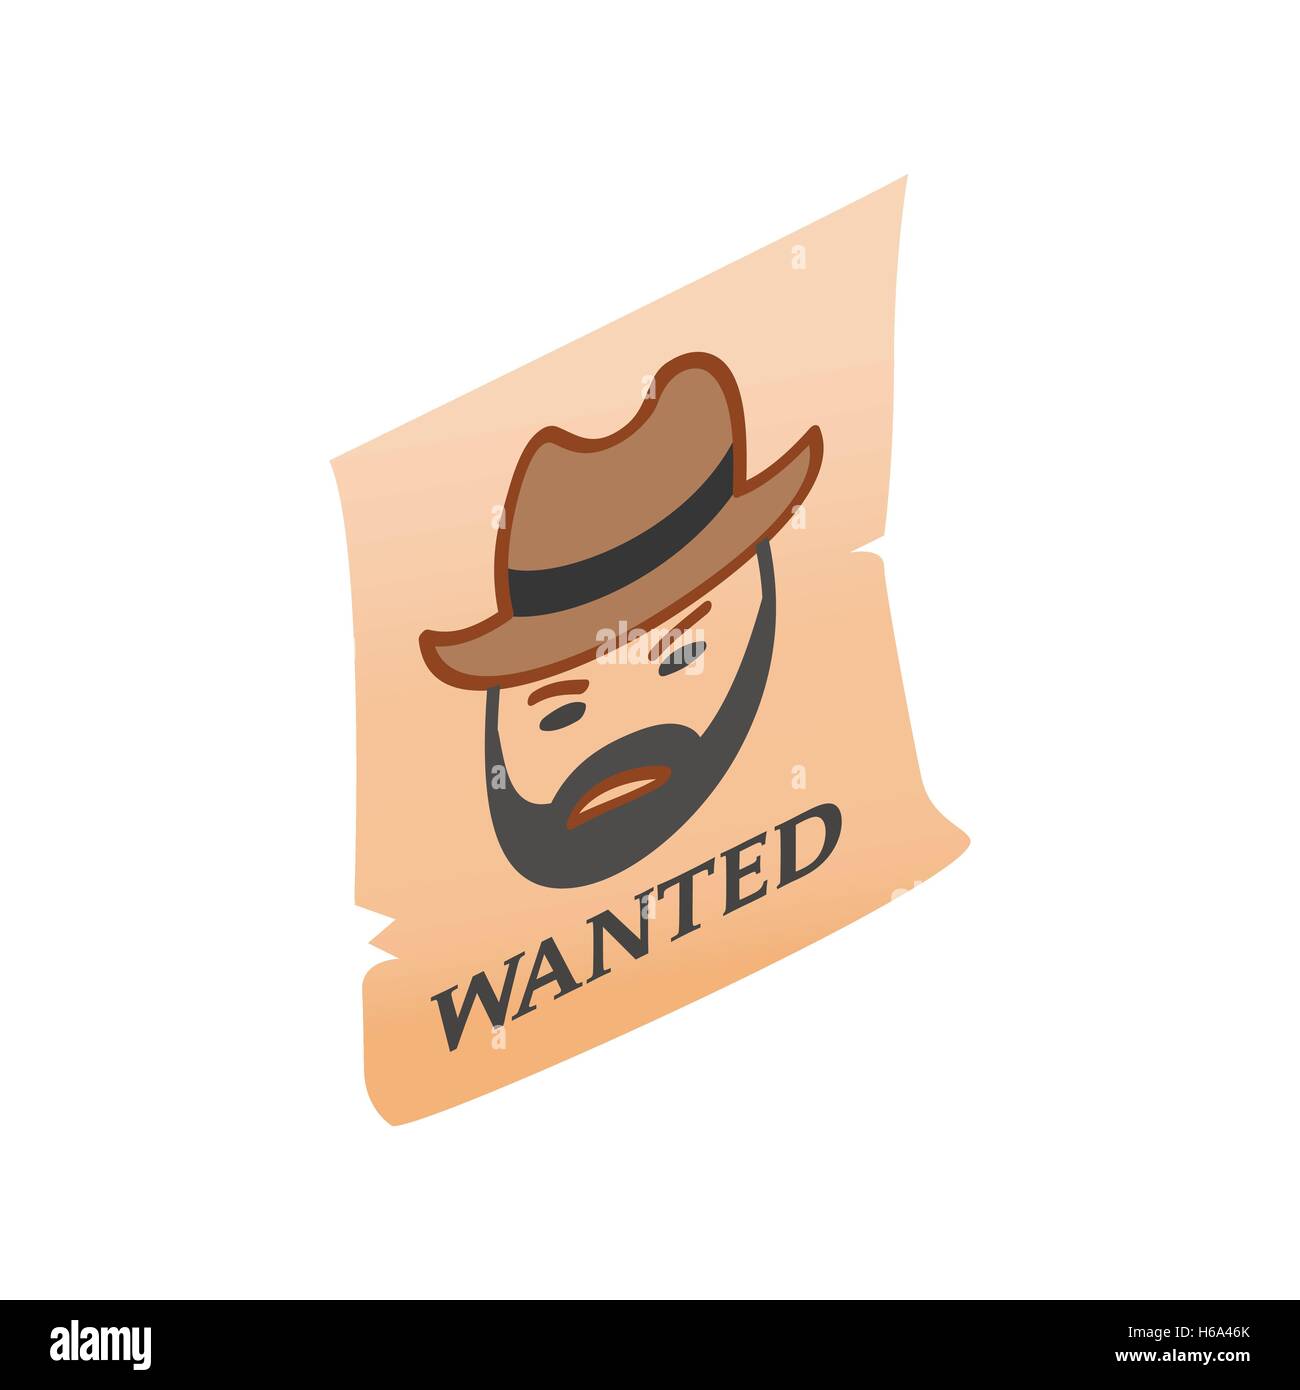 Vintage wanted poster isometric 3d icon Stock Vector